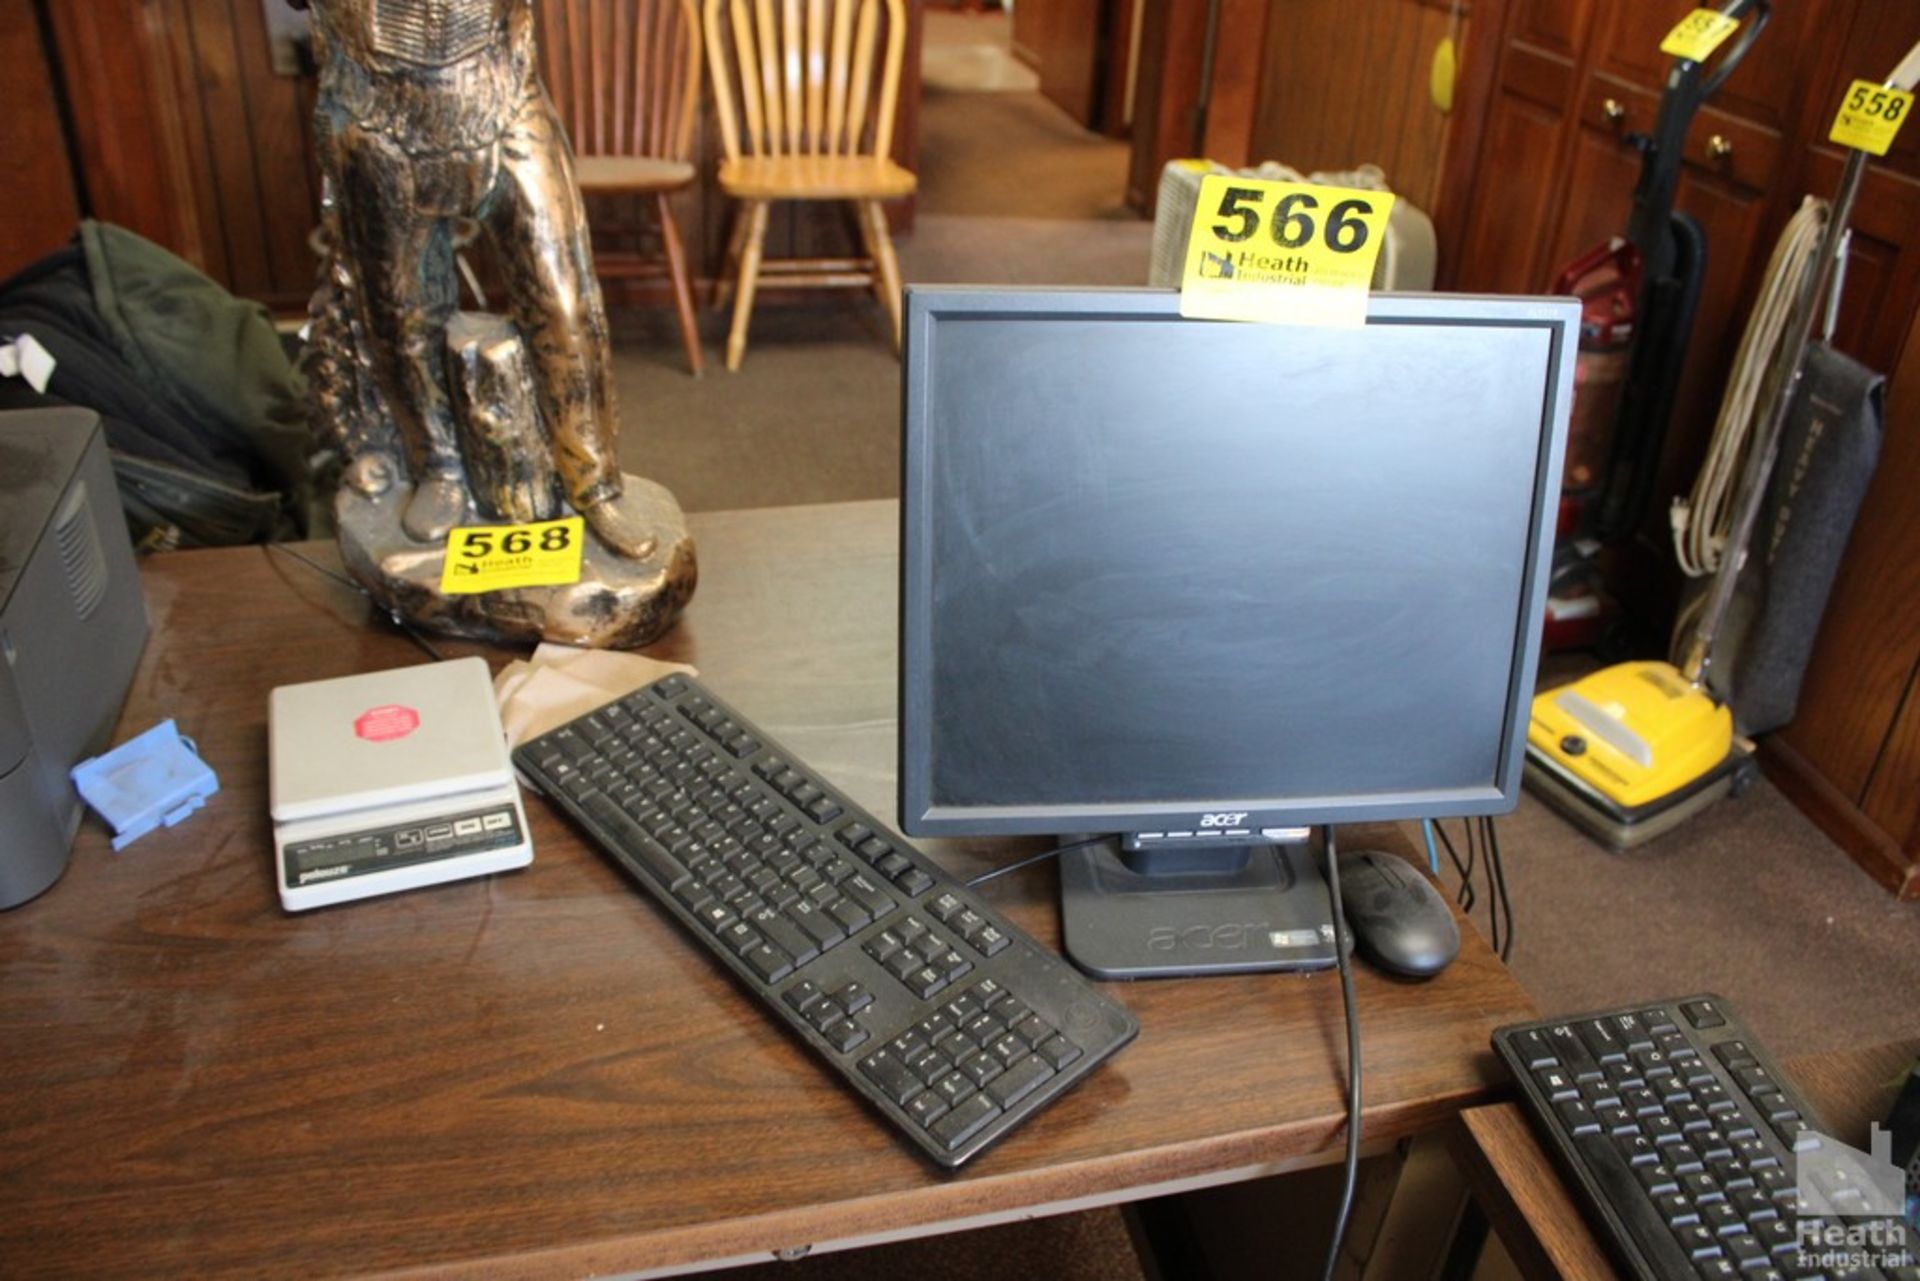 DELL OPTIPLEX 7010 WITH FLATSCREEN MONITOR AND MOUSE